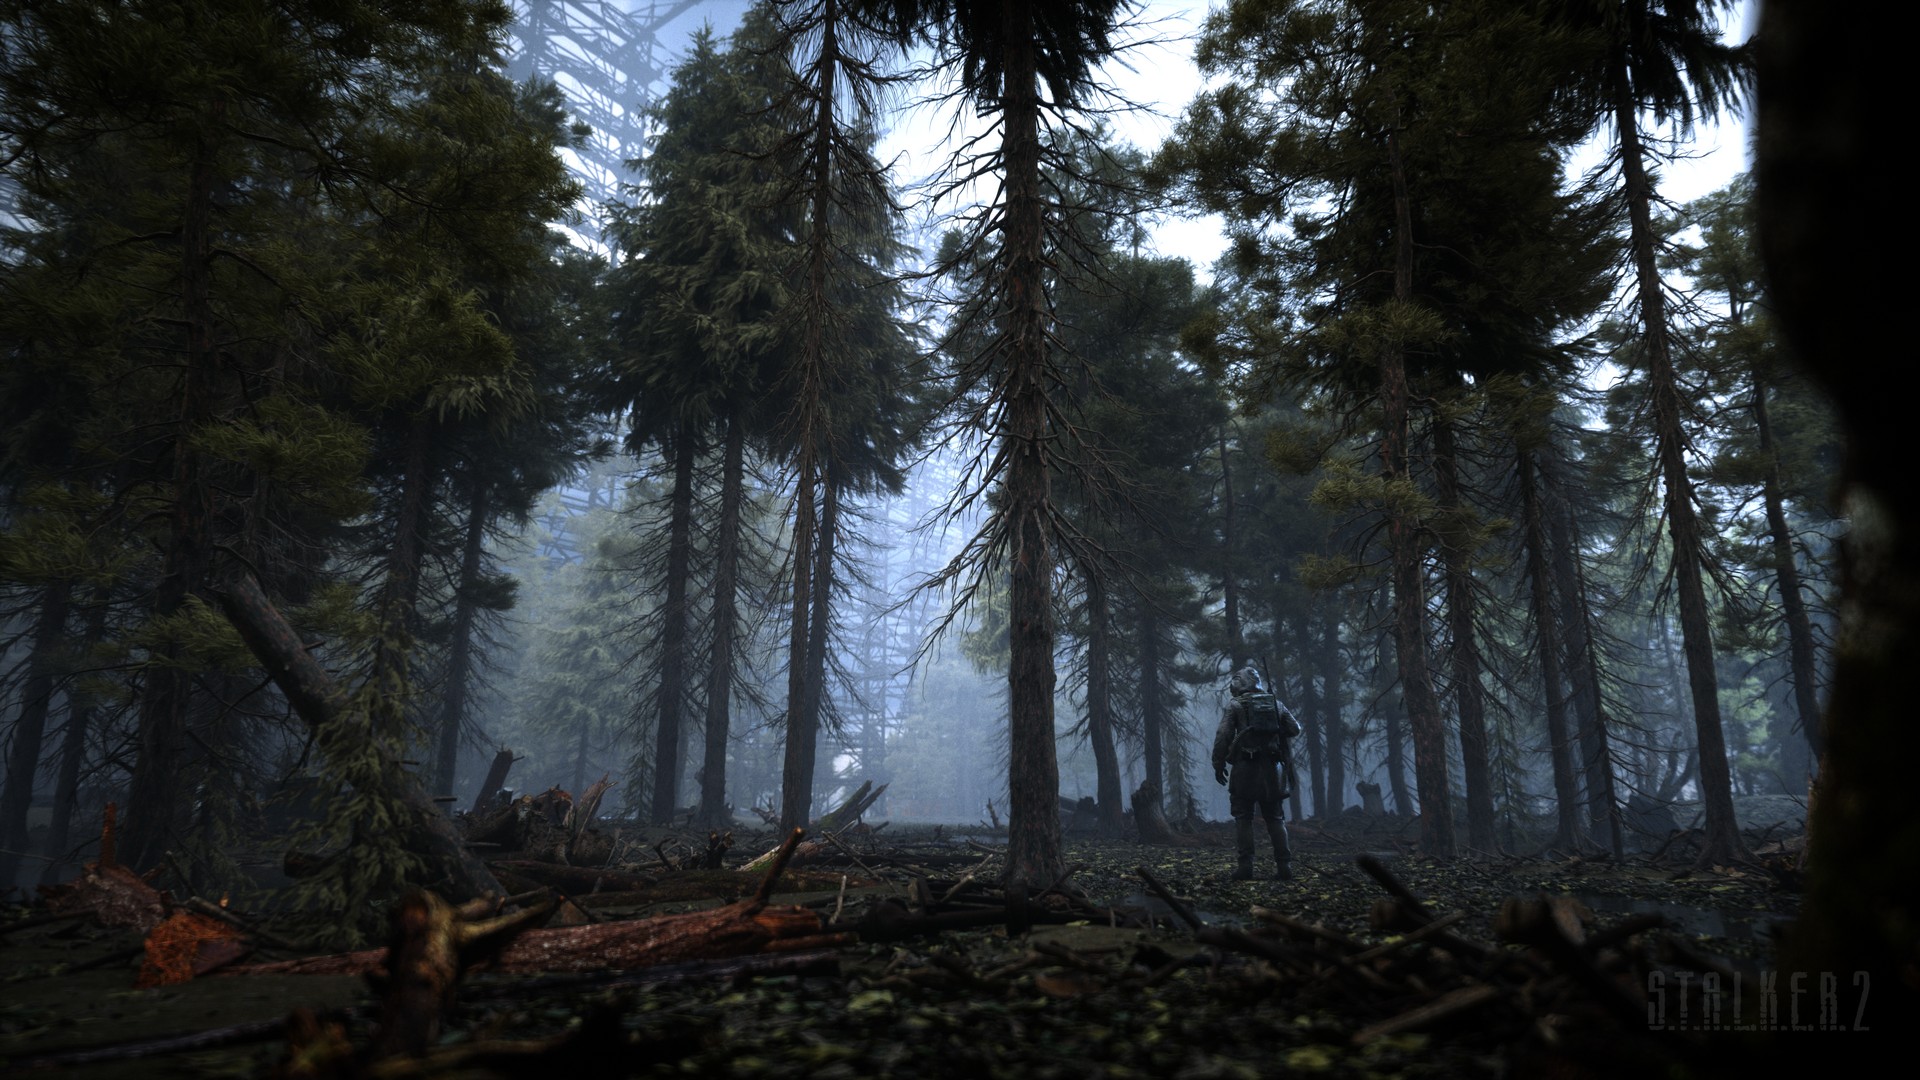 S.T.A.L.K.E.R. 2: Heart of Chernobyl gets new gameplay trailer